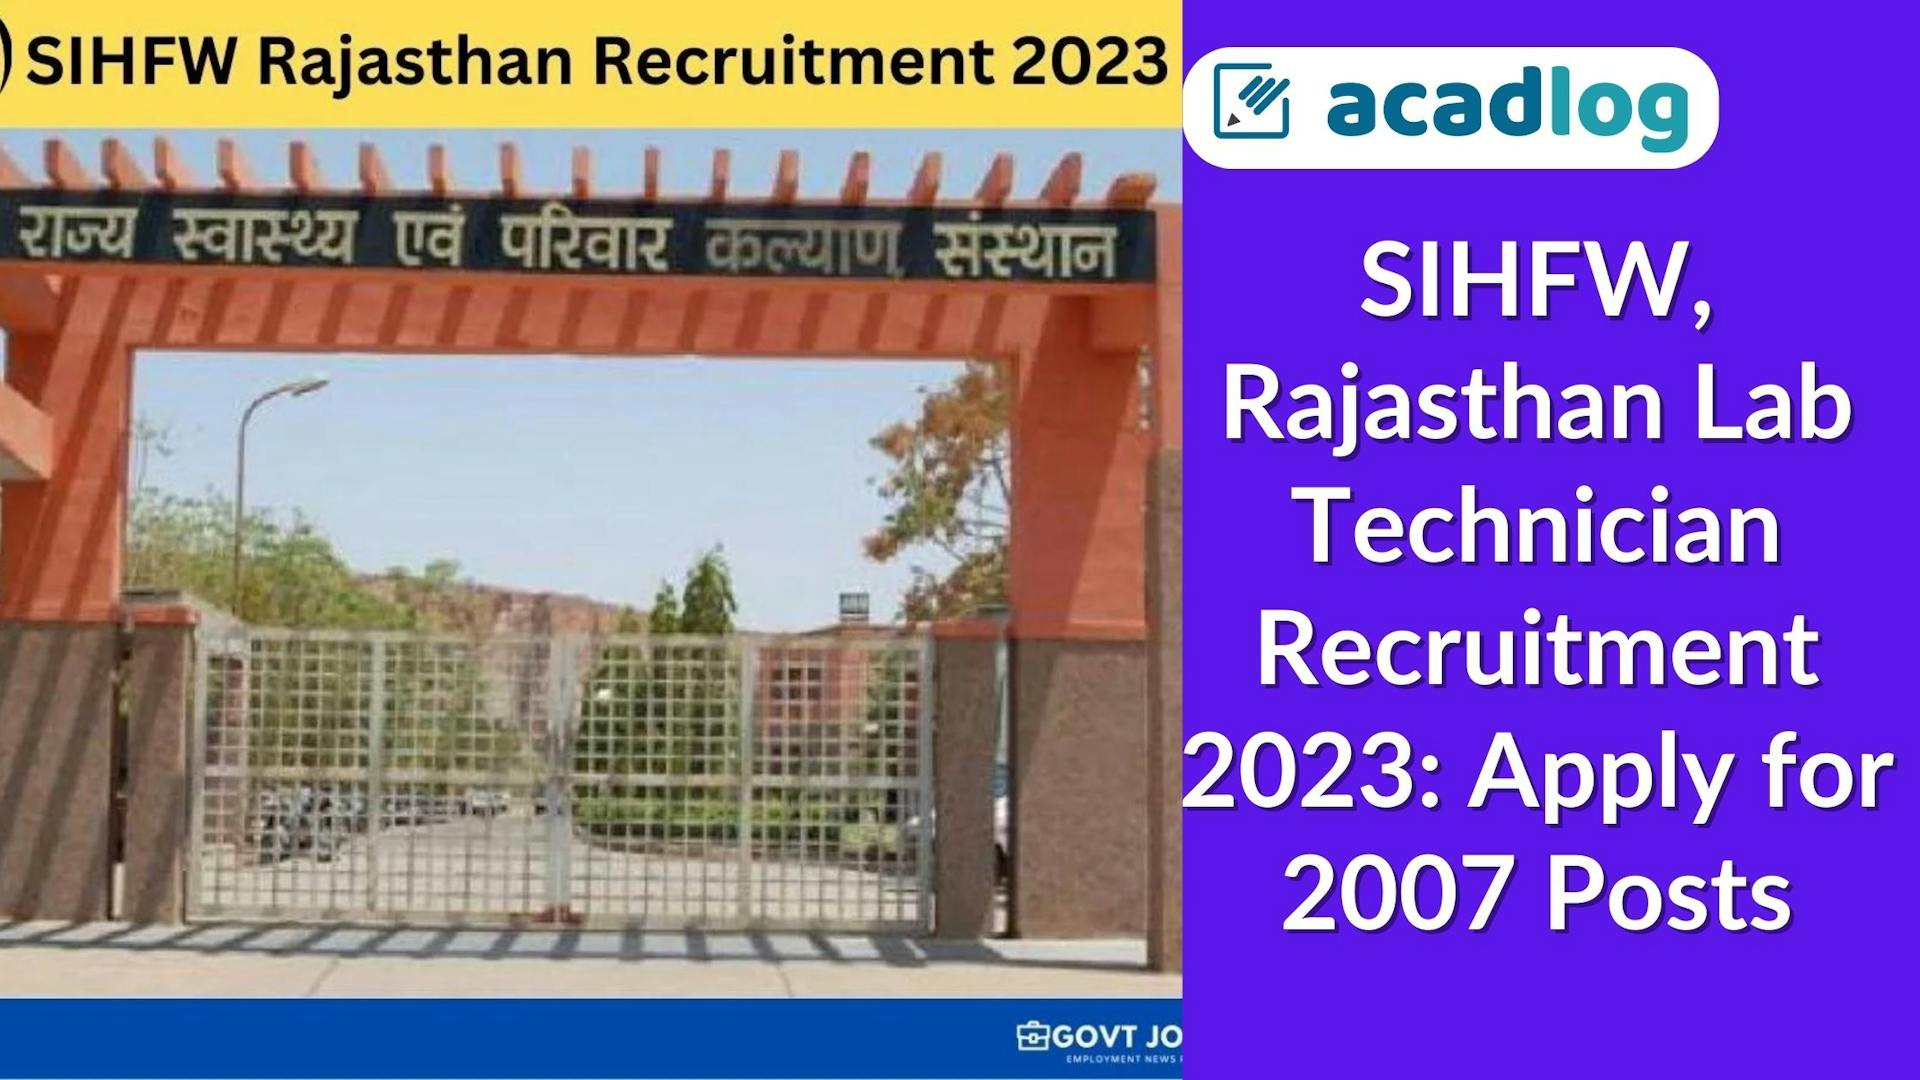 SIHFW, Rajasthan Lab Technician Recruitment 2023: Apply for 2007 Posts